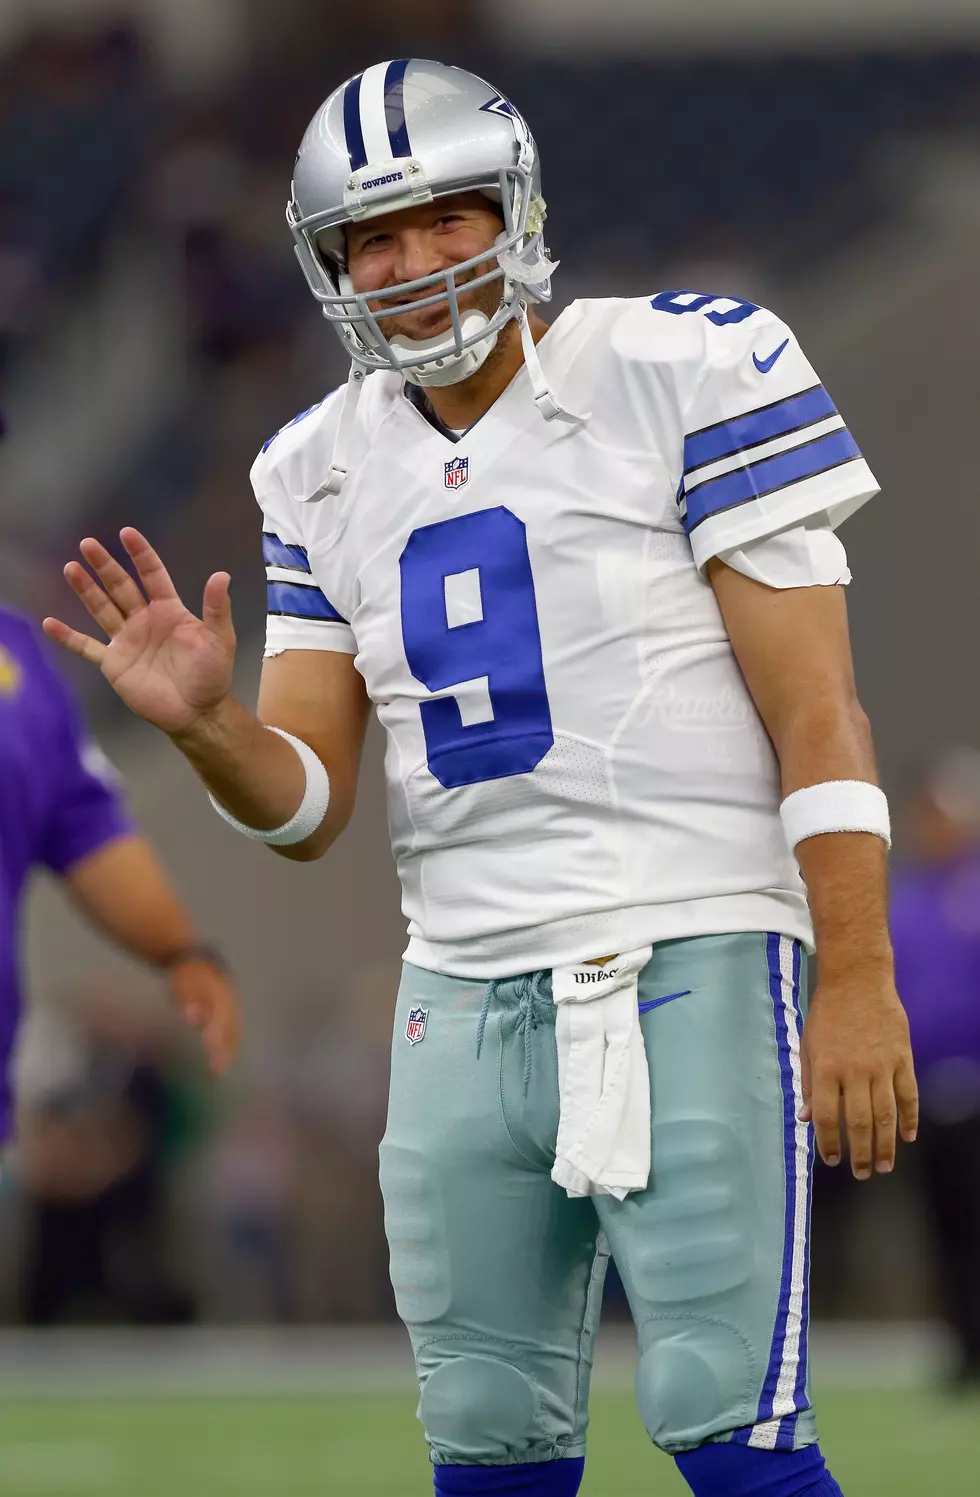 Tony Romo is Back Next Week for the Cowboys